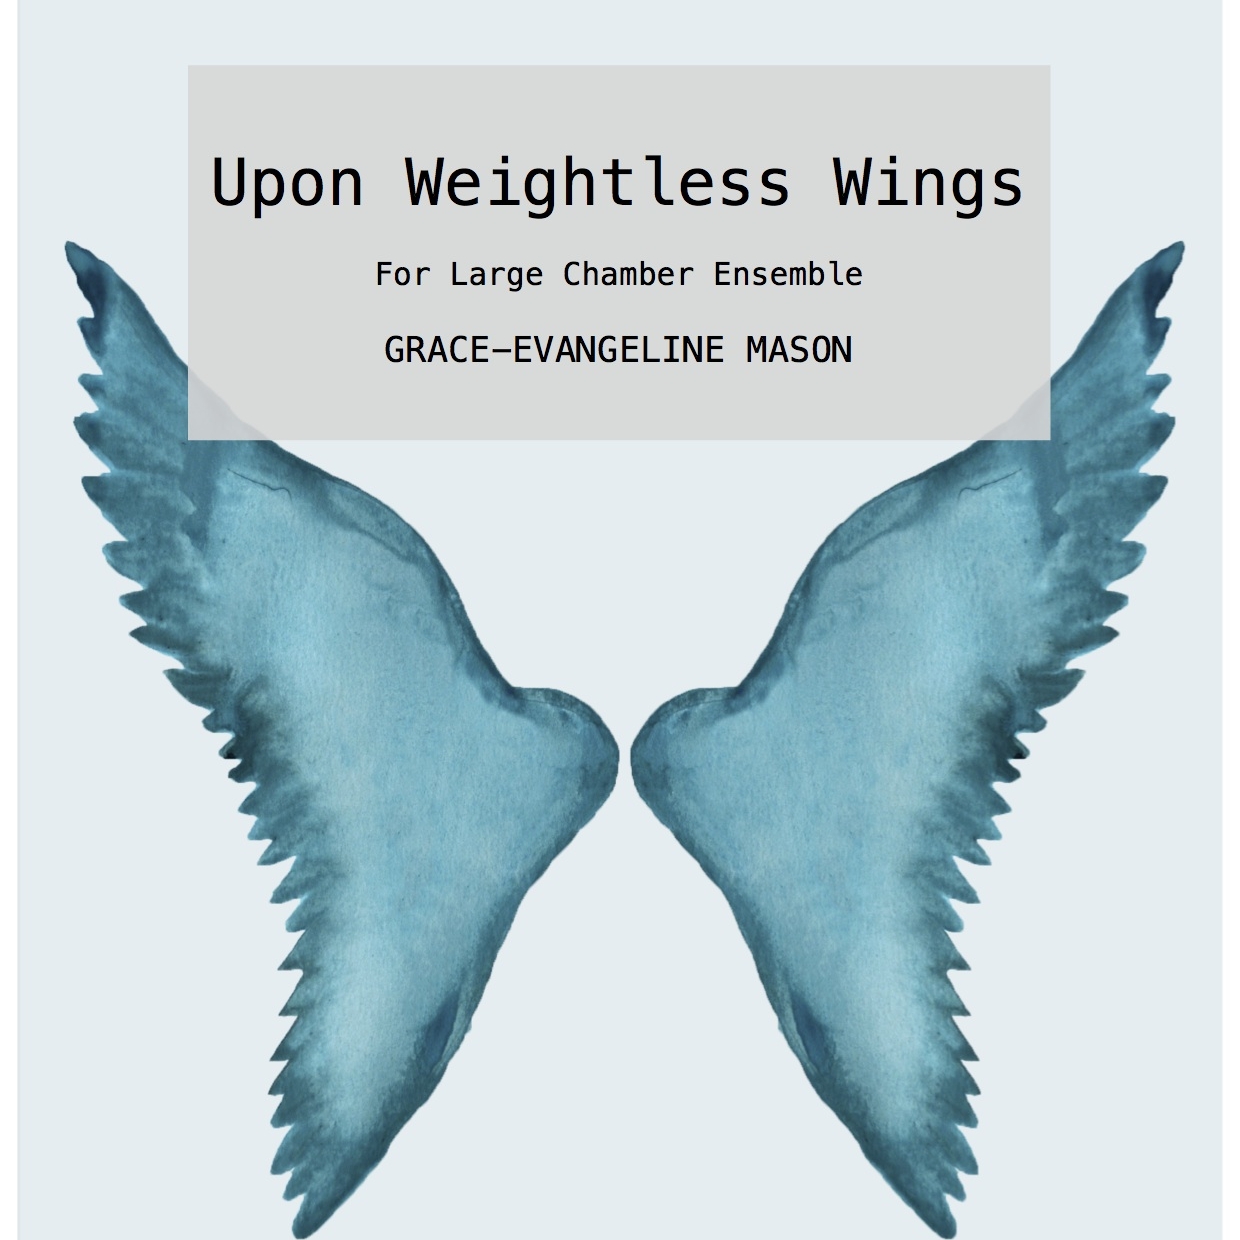 Upon Weightless Wings (2018)